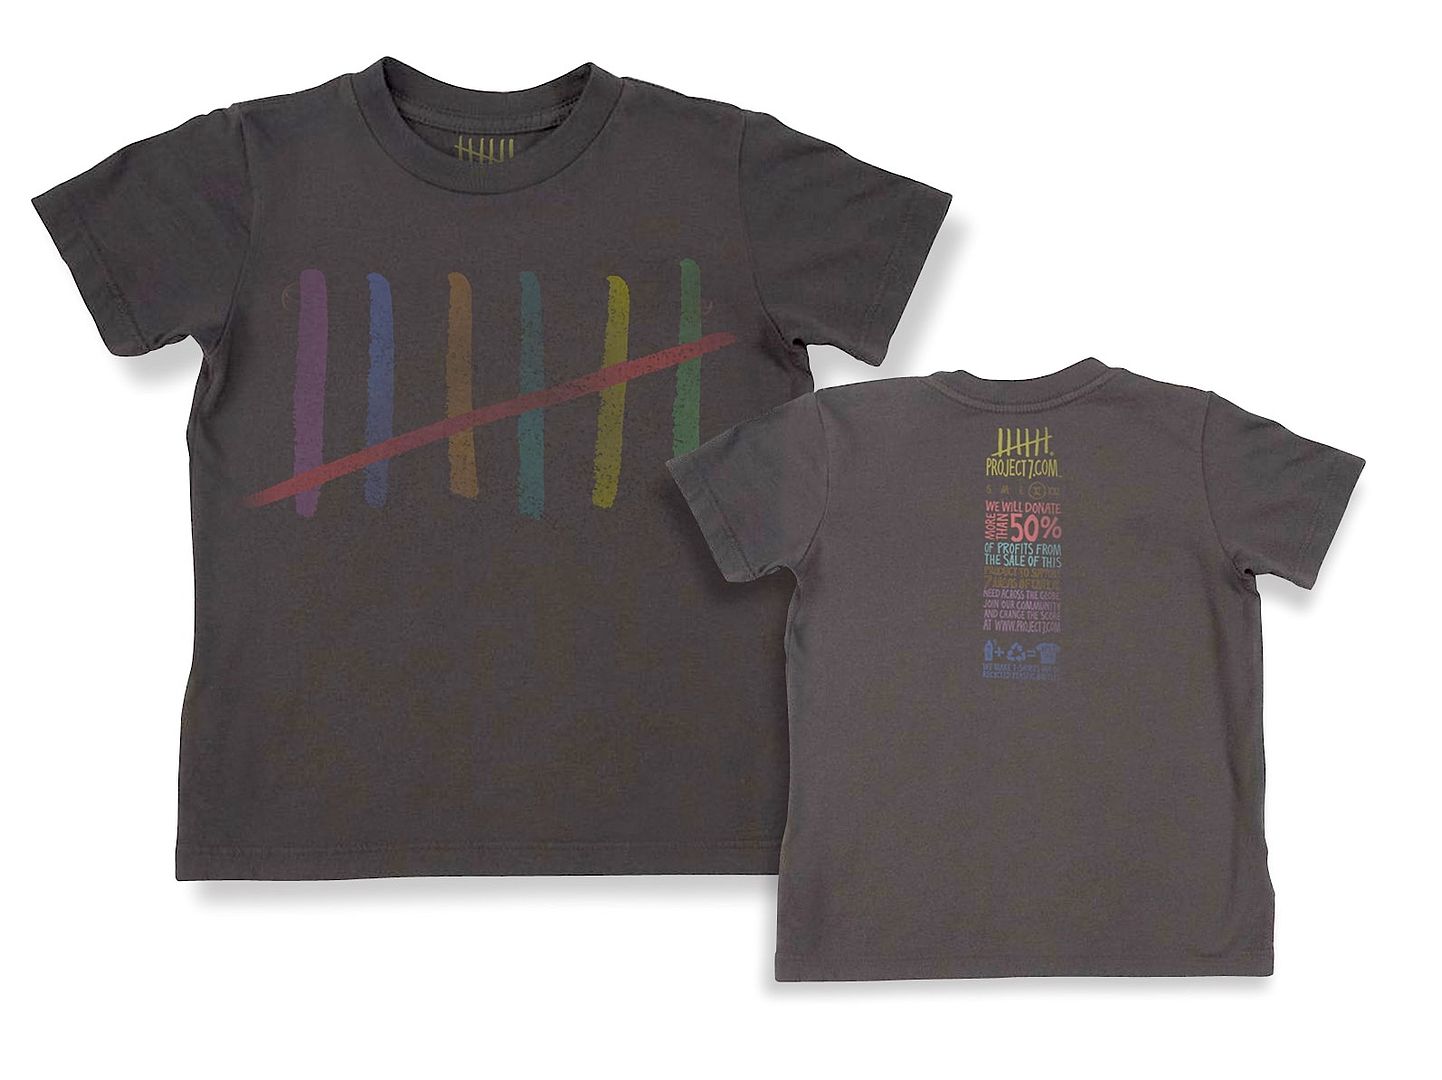 Organic cotton kids' t-shirts from Project 7 